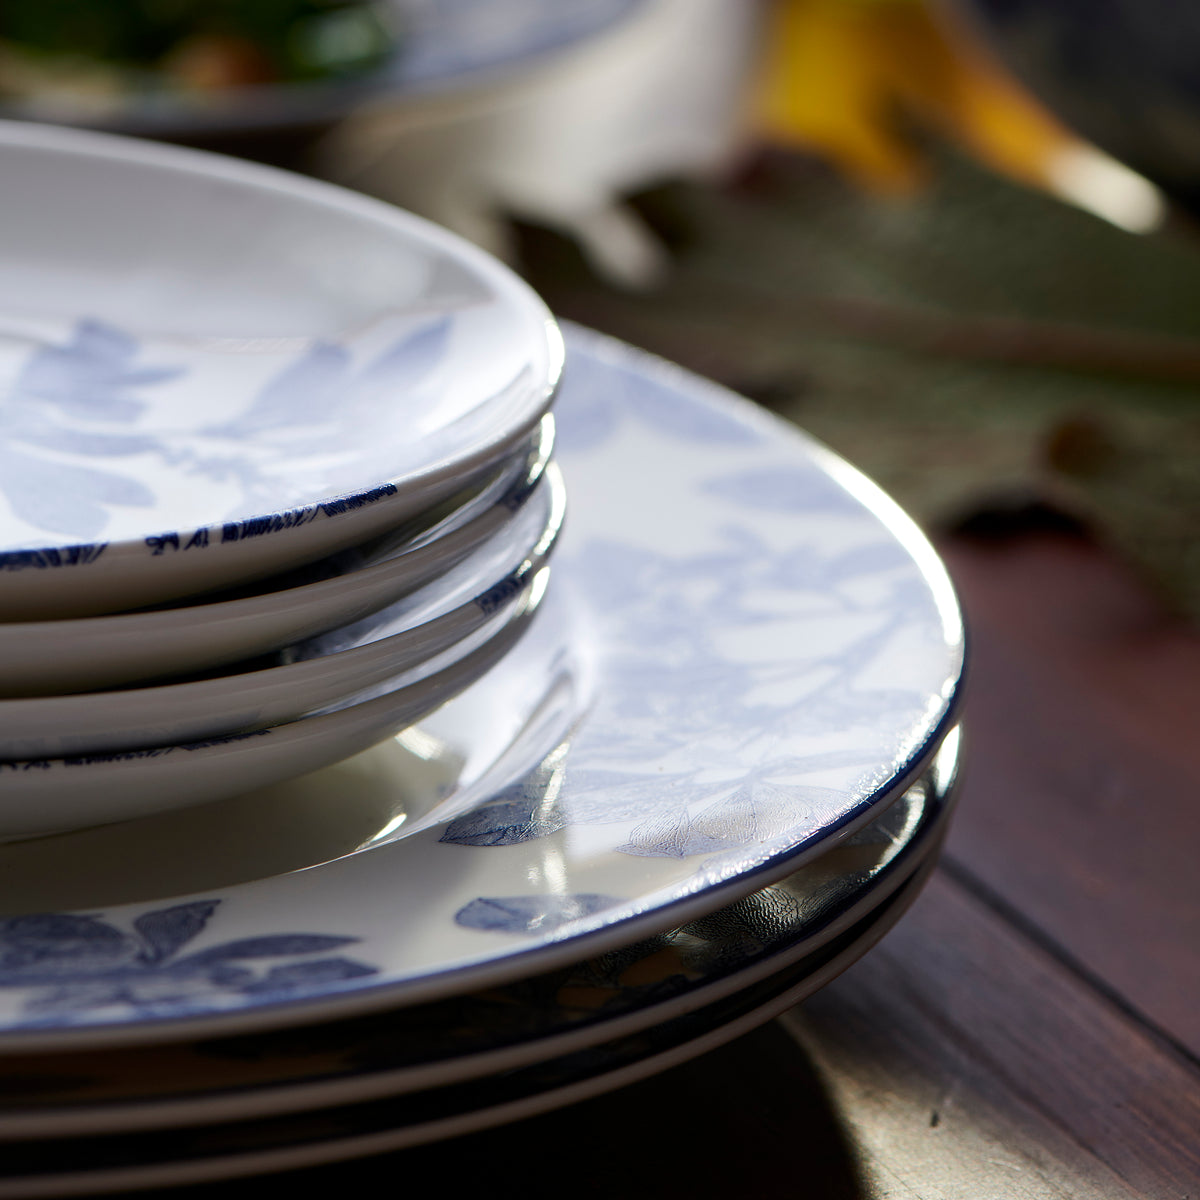 Close-up of a stack of Arbor Blue Small Plates by Caskata Artisanal Home with blue floral patterns on a wooden table. Sunlight casts shadows on the premium porcelain plates, highlighting their intricate botanical details.